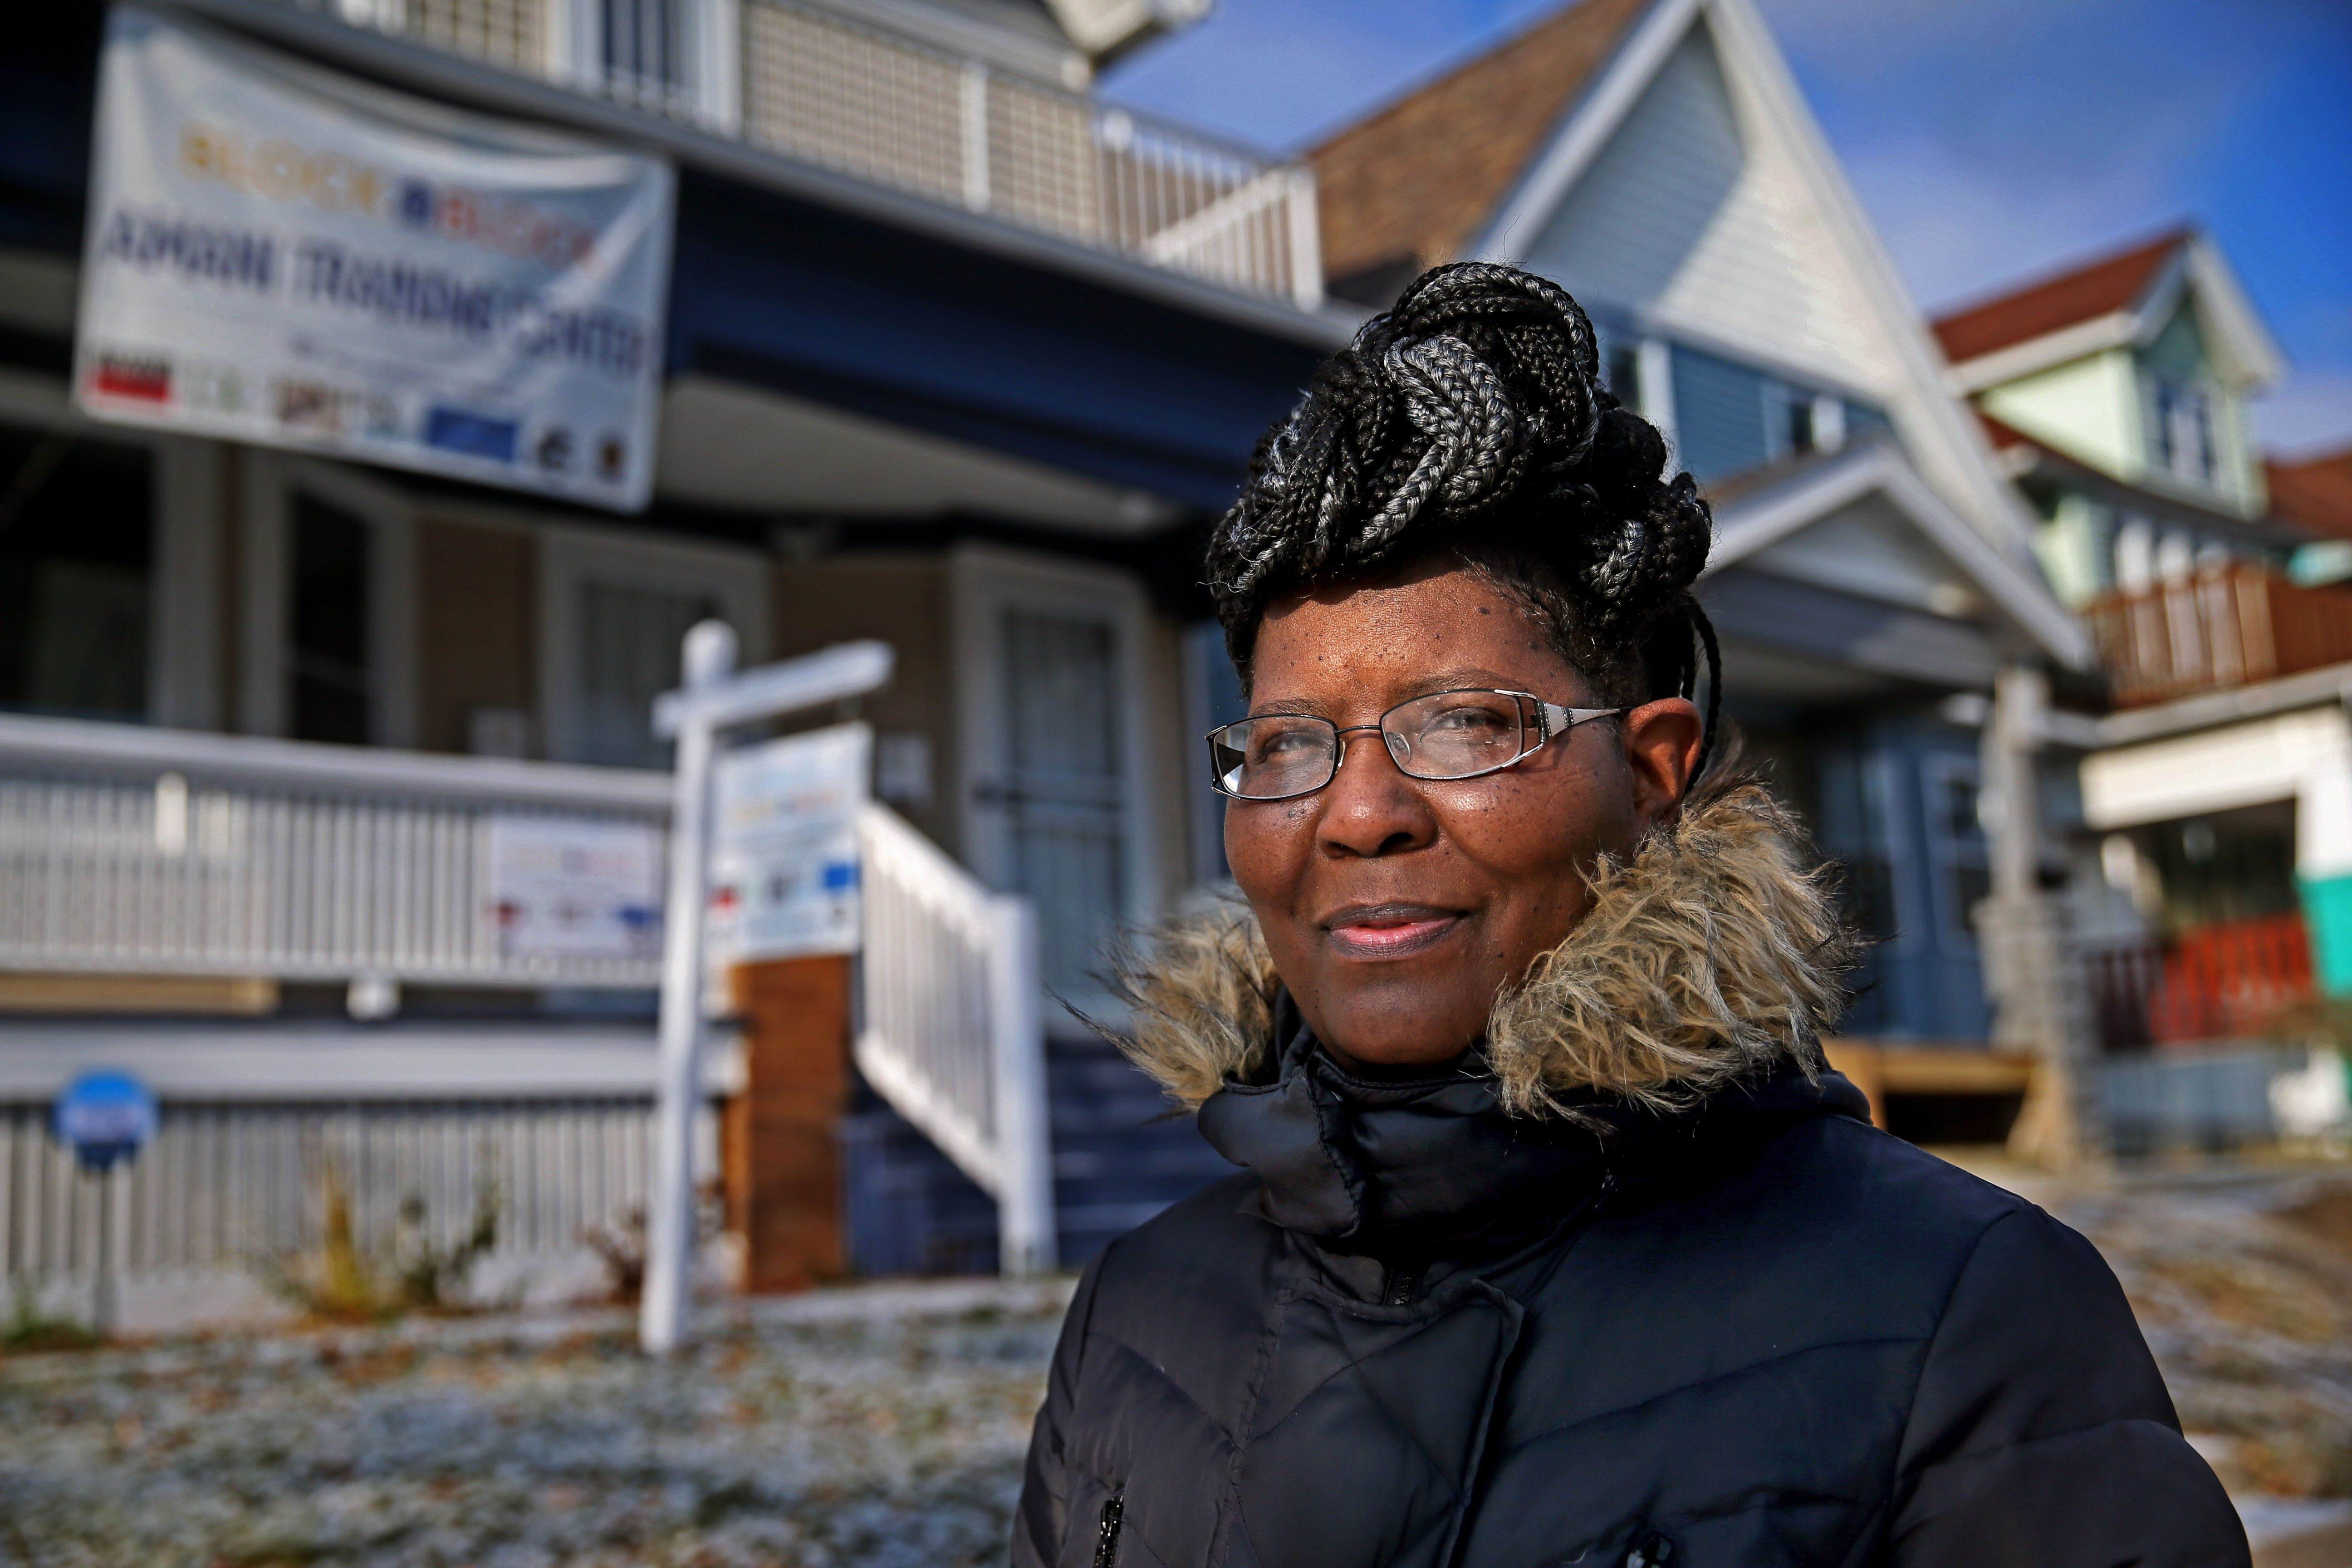 Barbara Smith is the housing coordinator for Amani United, a community group working to improve housing conditions in the north side neighborhood.